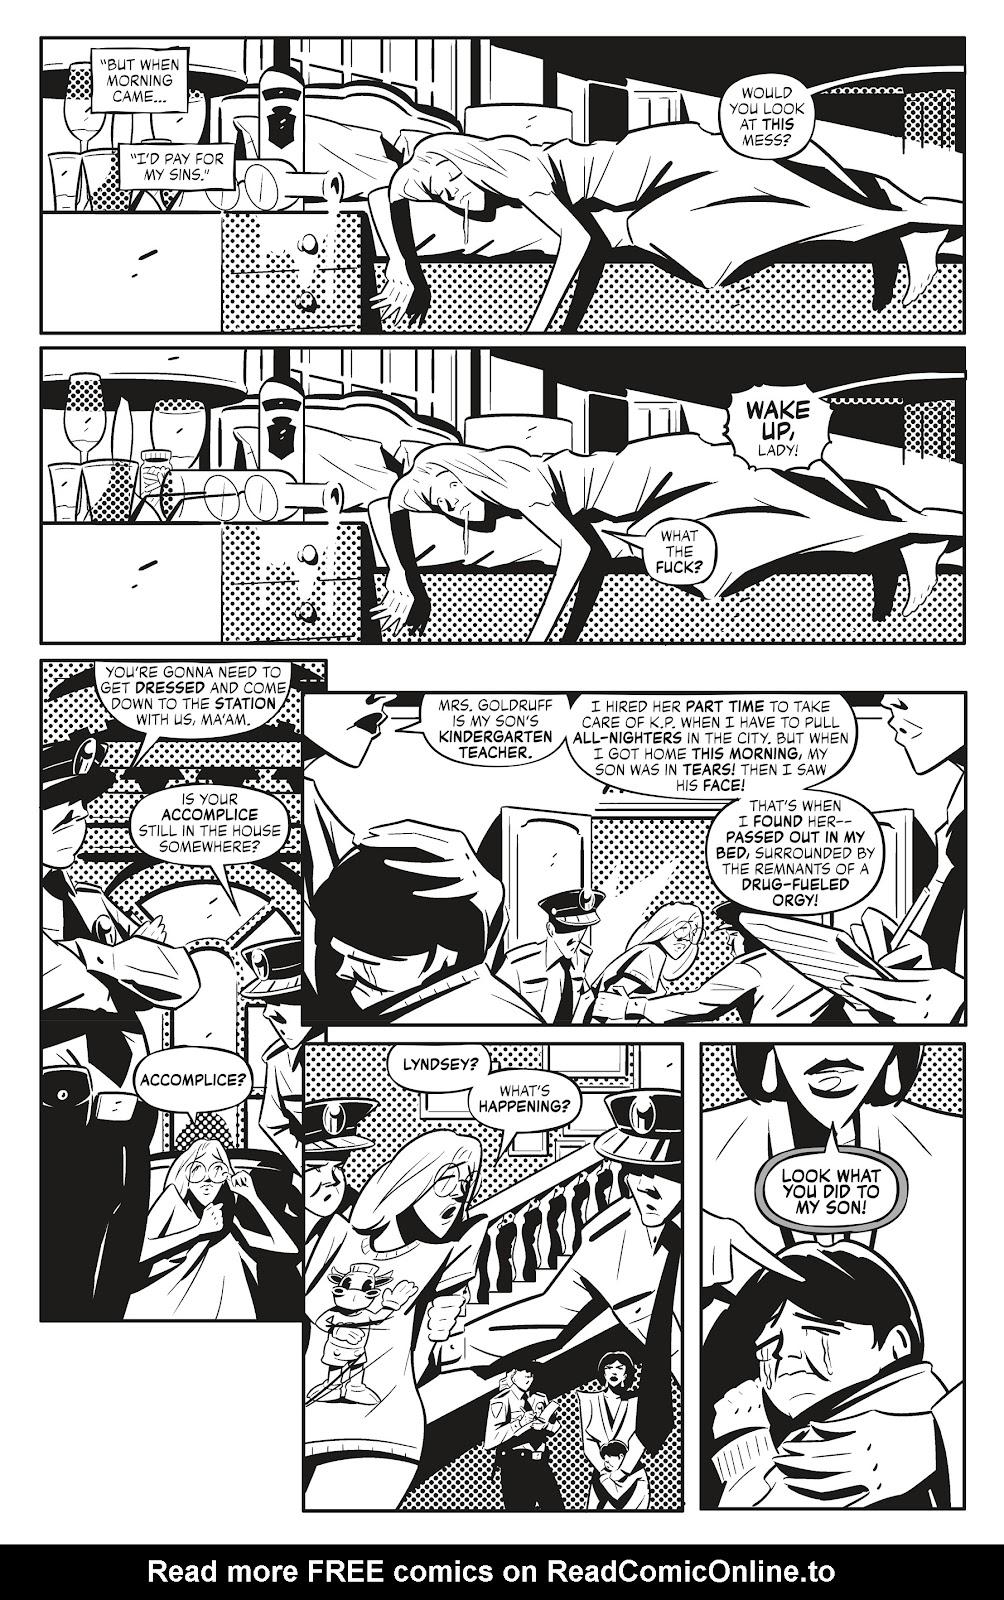 Quick Stops Vol. 2 issue 2 - Page 15